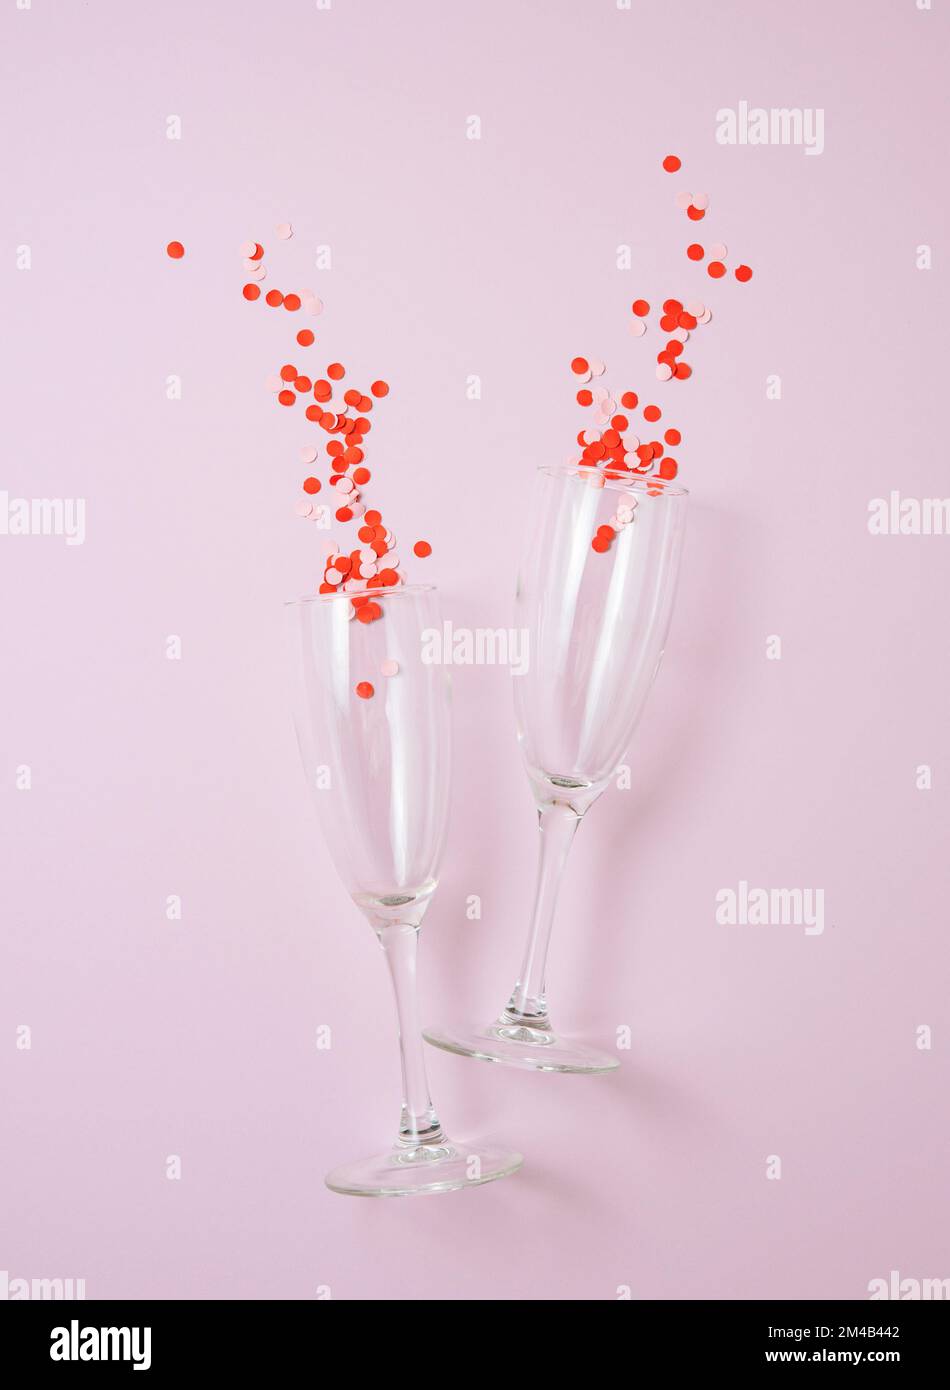 Flat lay of celebration. Two glasses with confetti  on a pastel pink  background. Concept of Valentine's Day, Mother's Day, wedding day. Top view Stock Photo